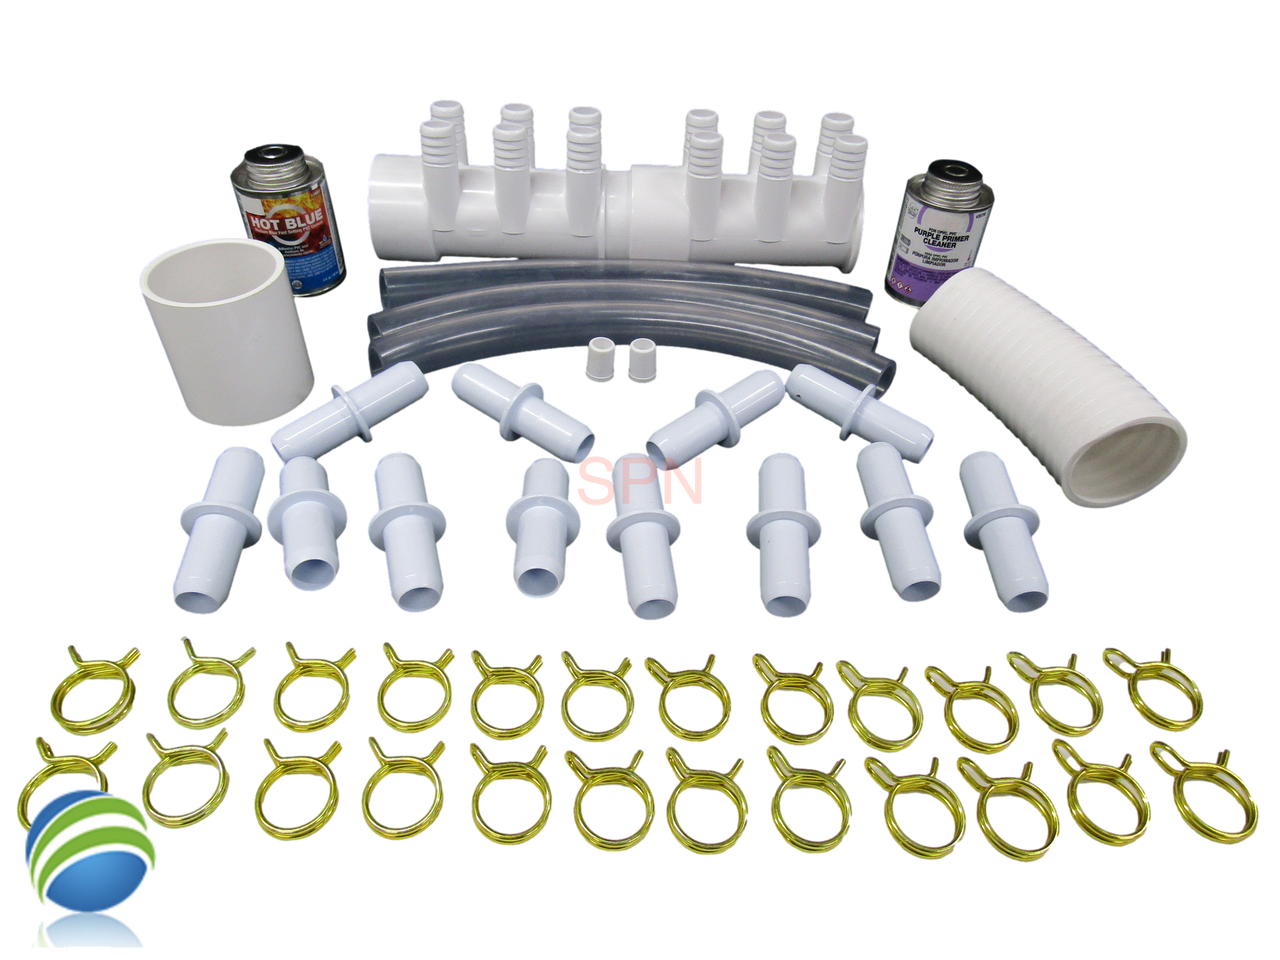 Manifold Hot Tub Spa Dead End (12) 3/4" Outlet Glue And Coupler Kit Video How To